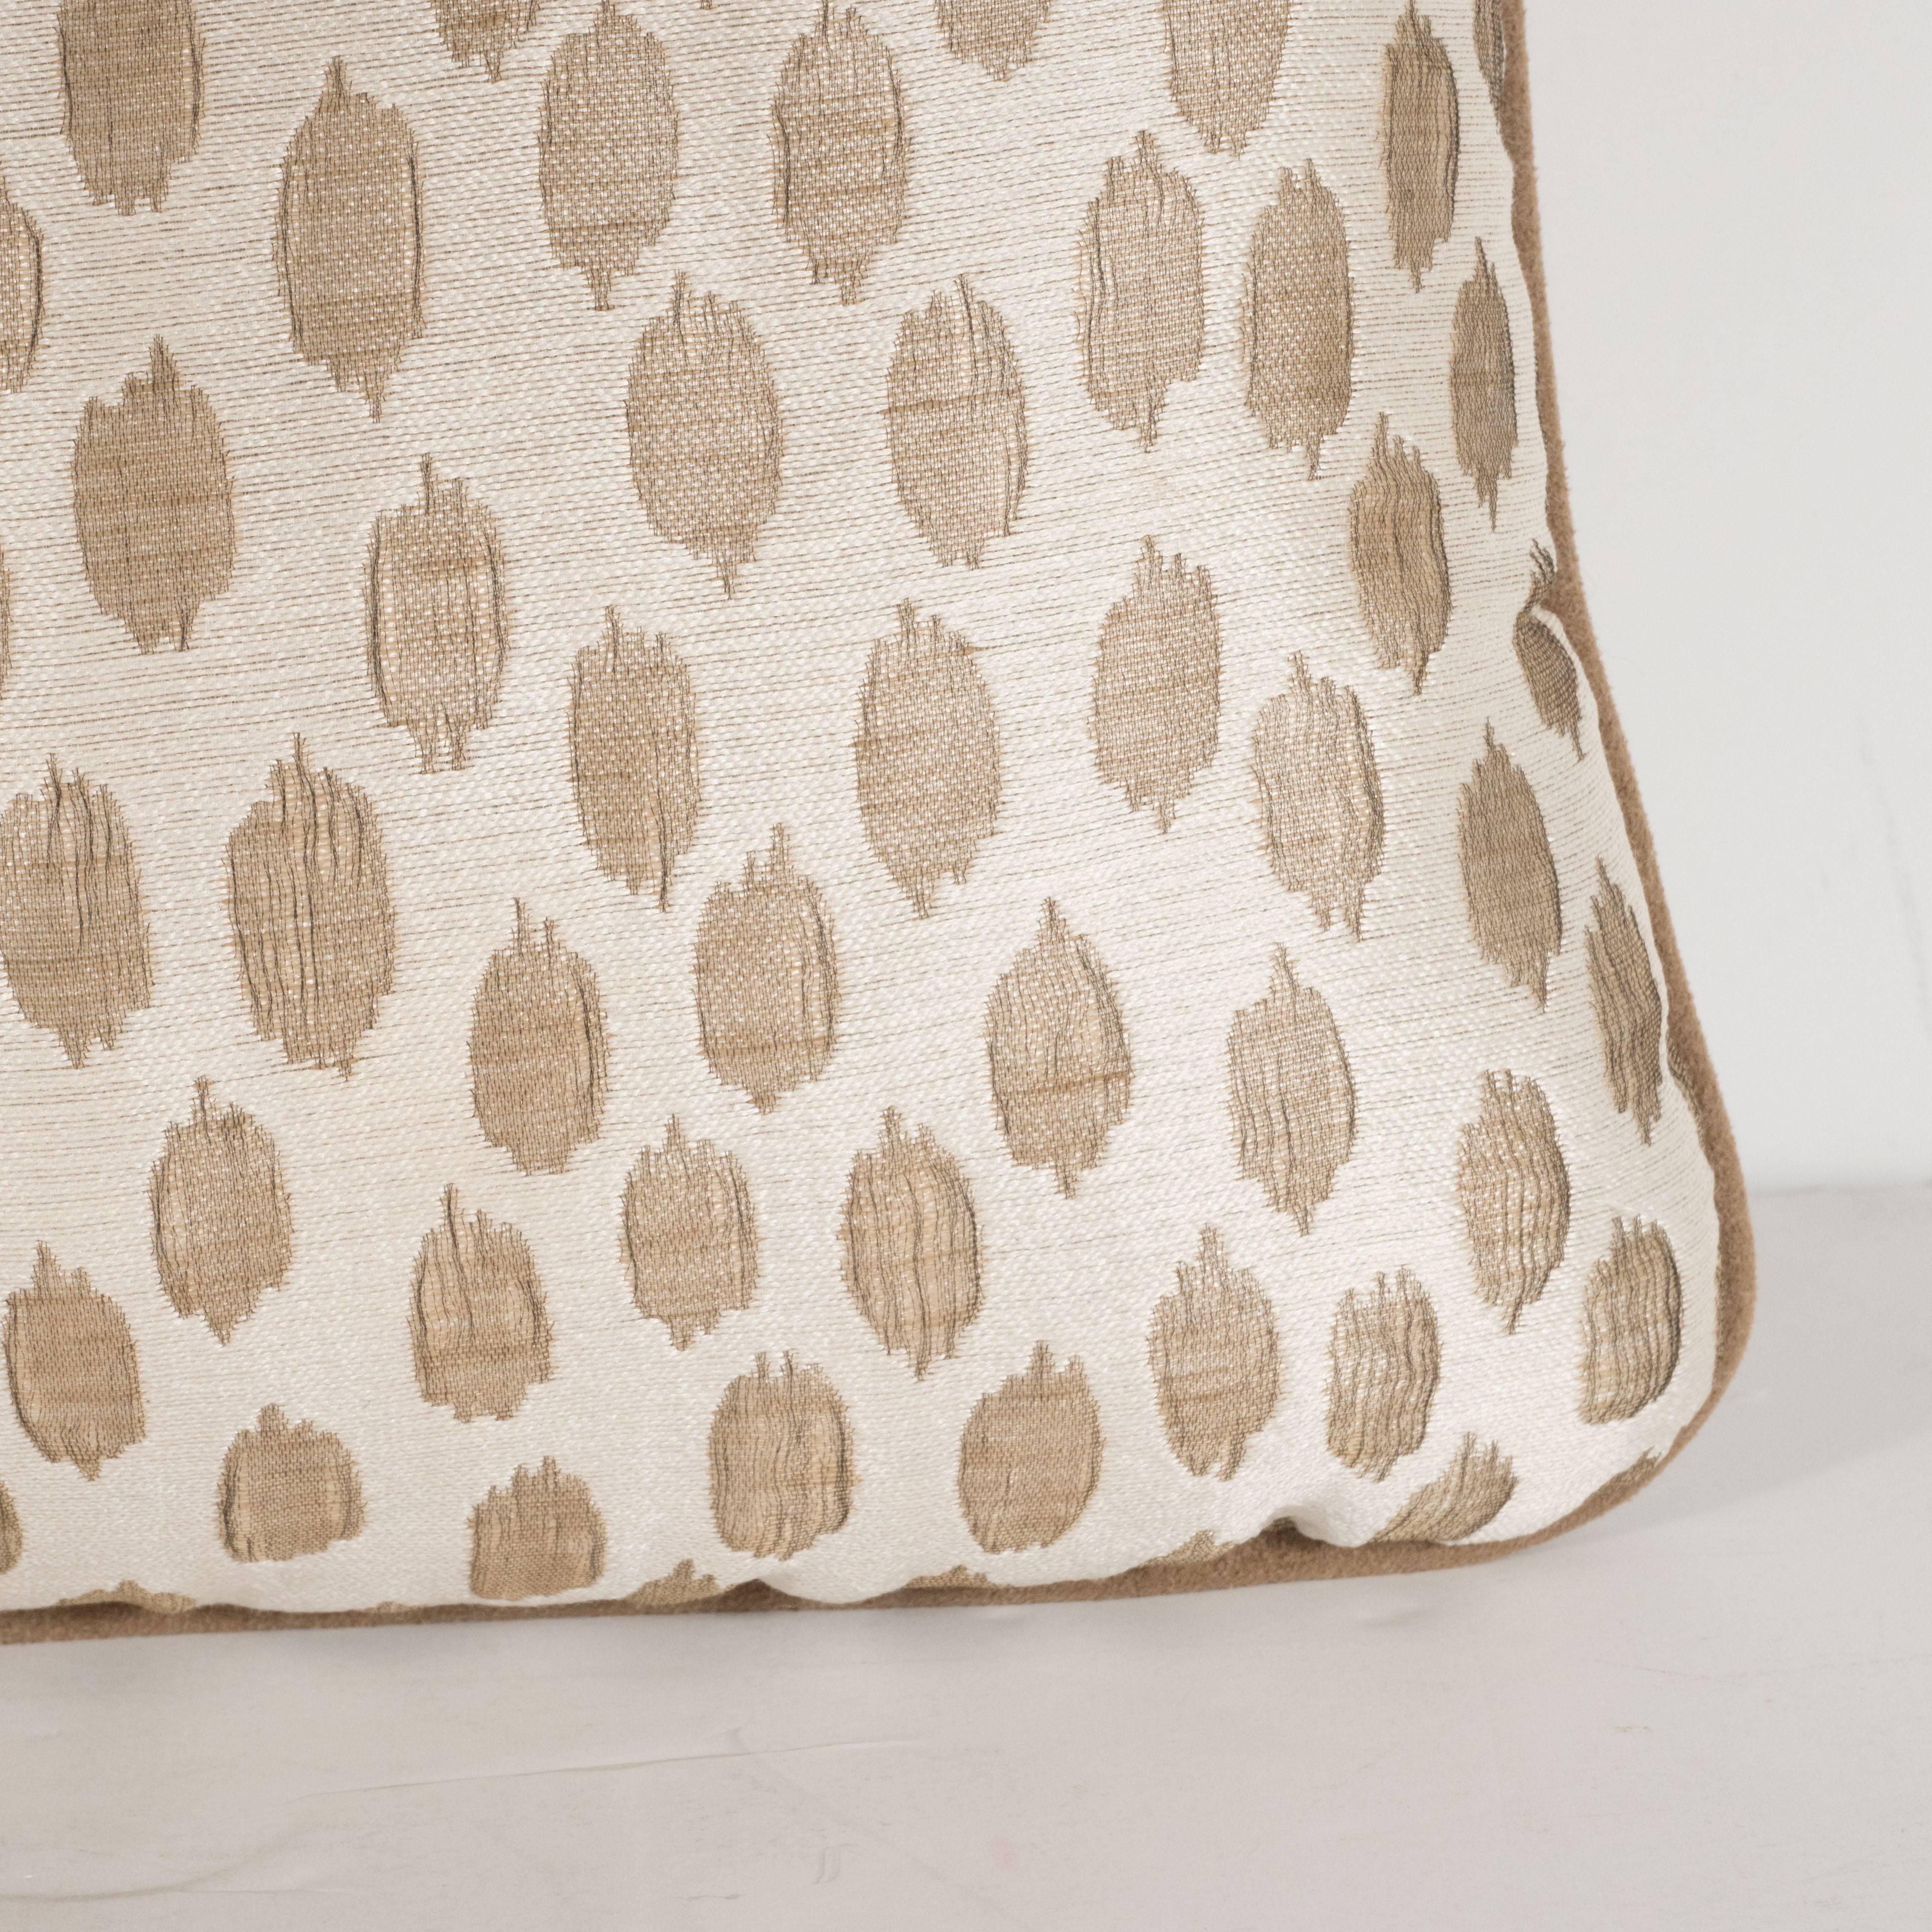 Contemporary Modernist Rectangular Pillow with Organic Patterned Ecru & Pale Gold Fabric For Sale